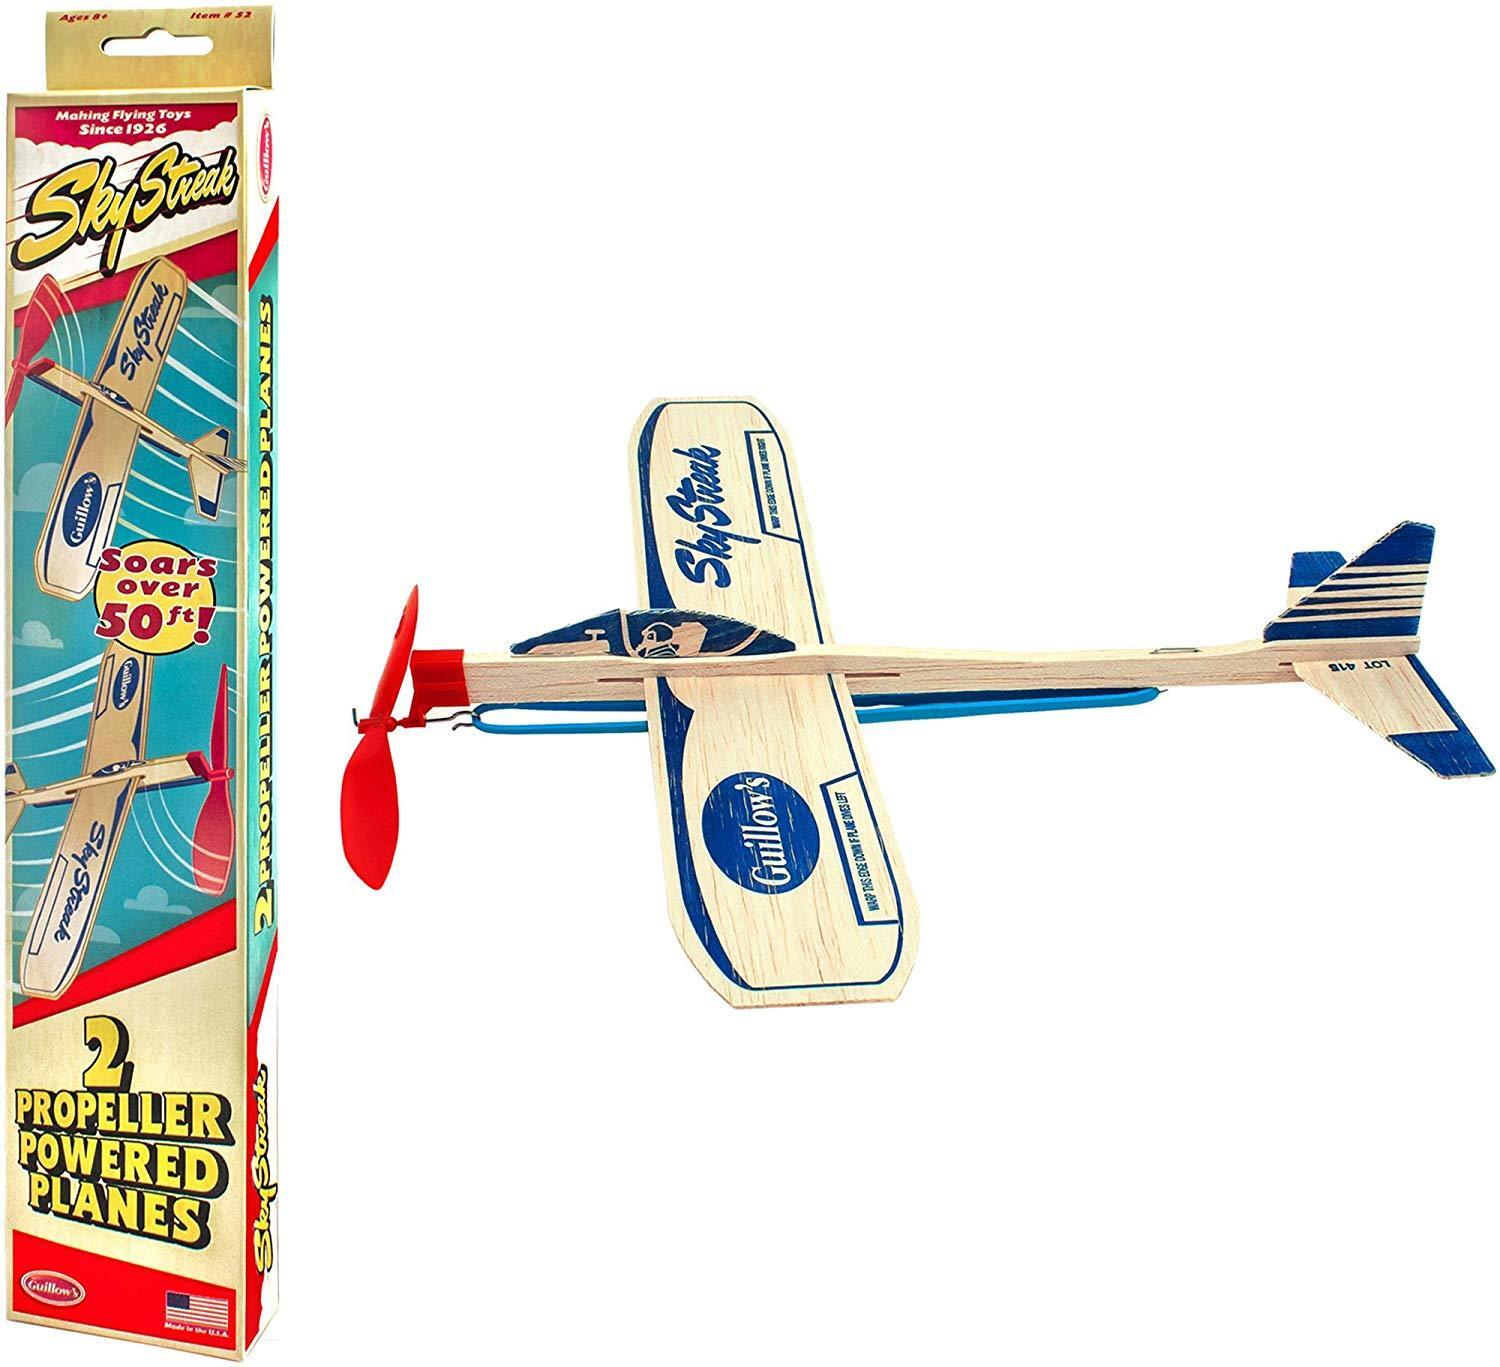 2 New Paul Guillow Wooden Balsa Airplanes Rubber Band Model Toy Plane Airplane